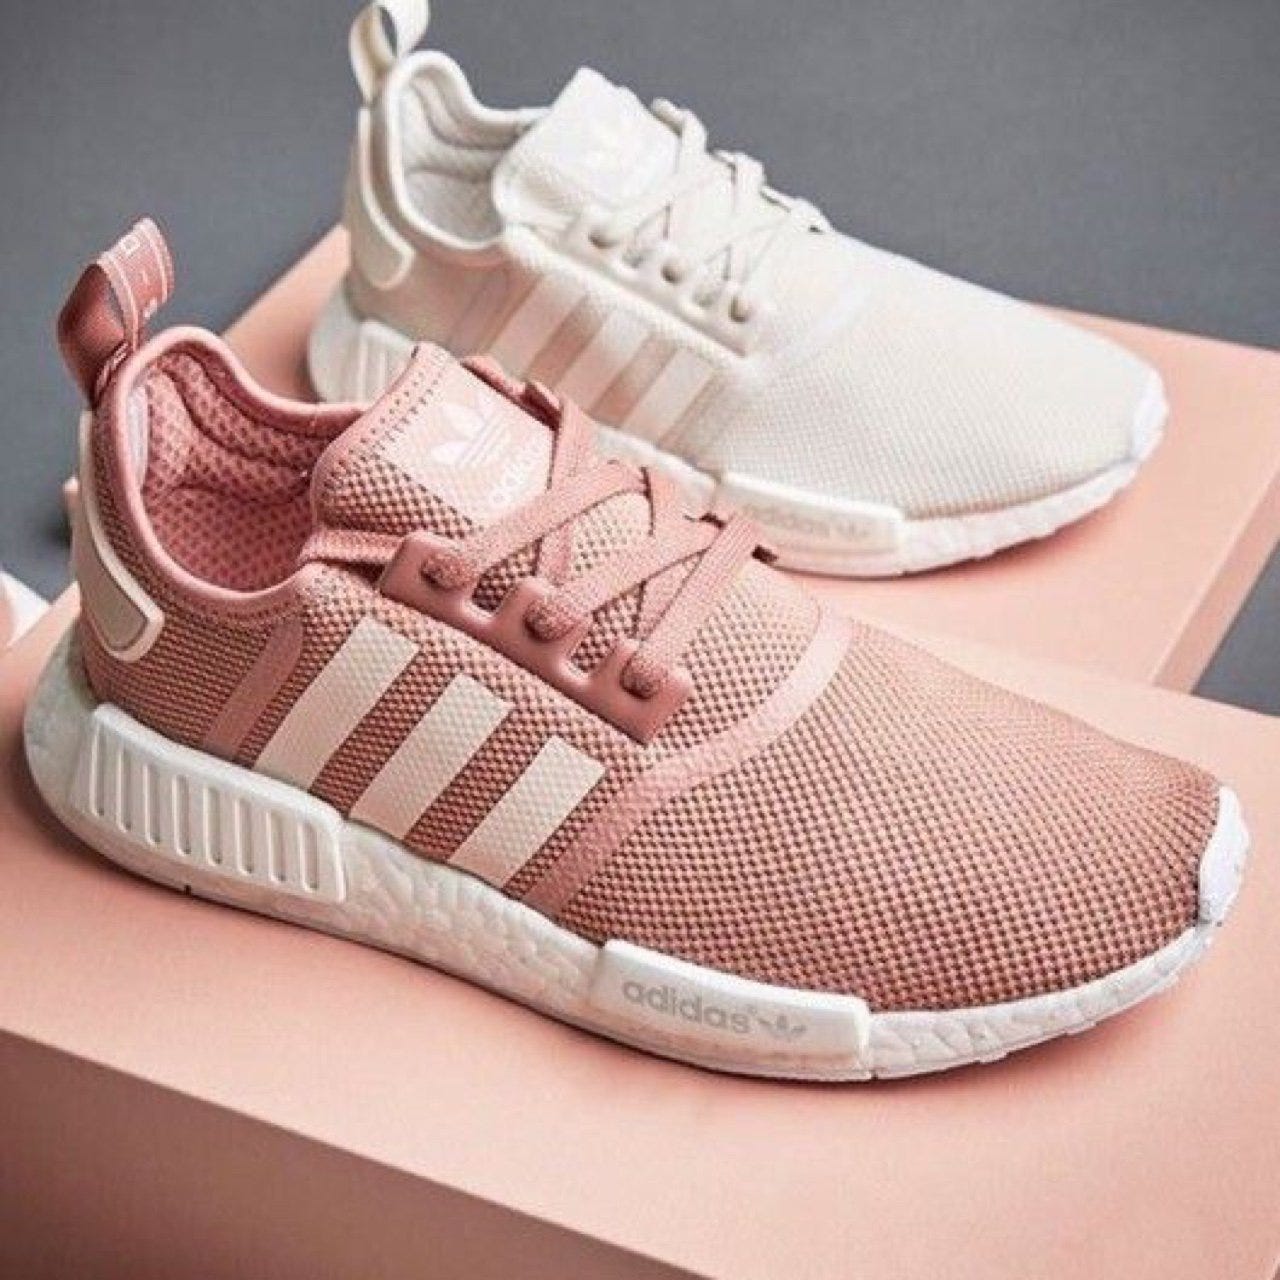 What do you think about these shoes (adidas nmd r1) based on your